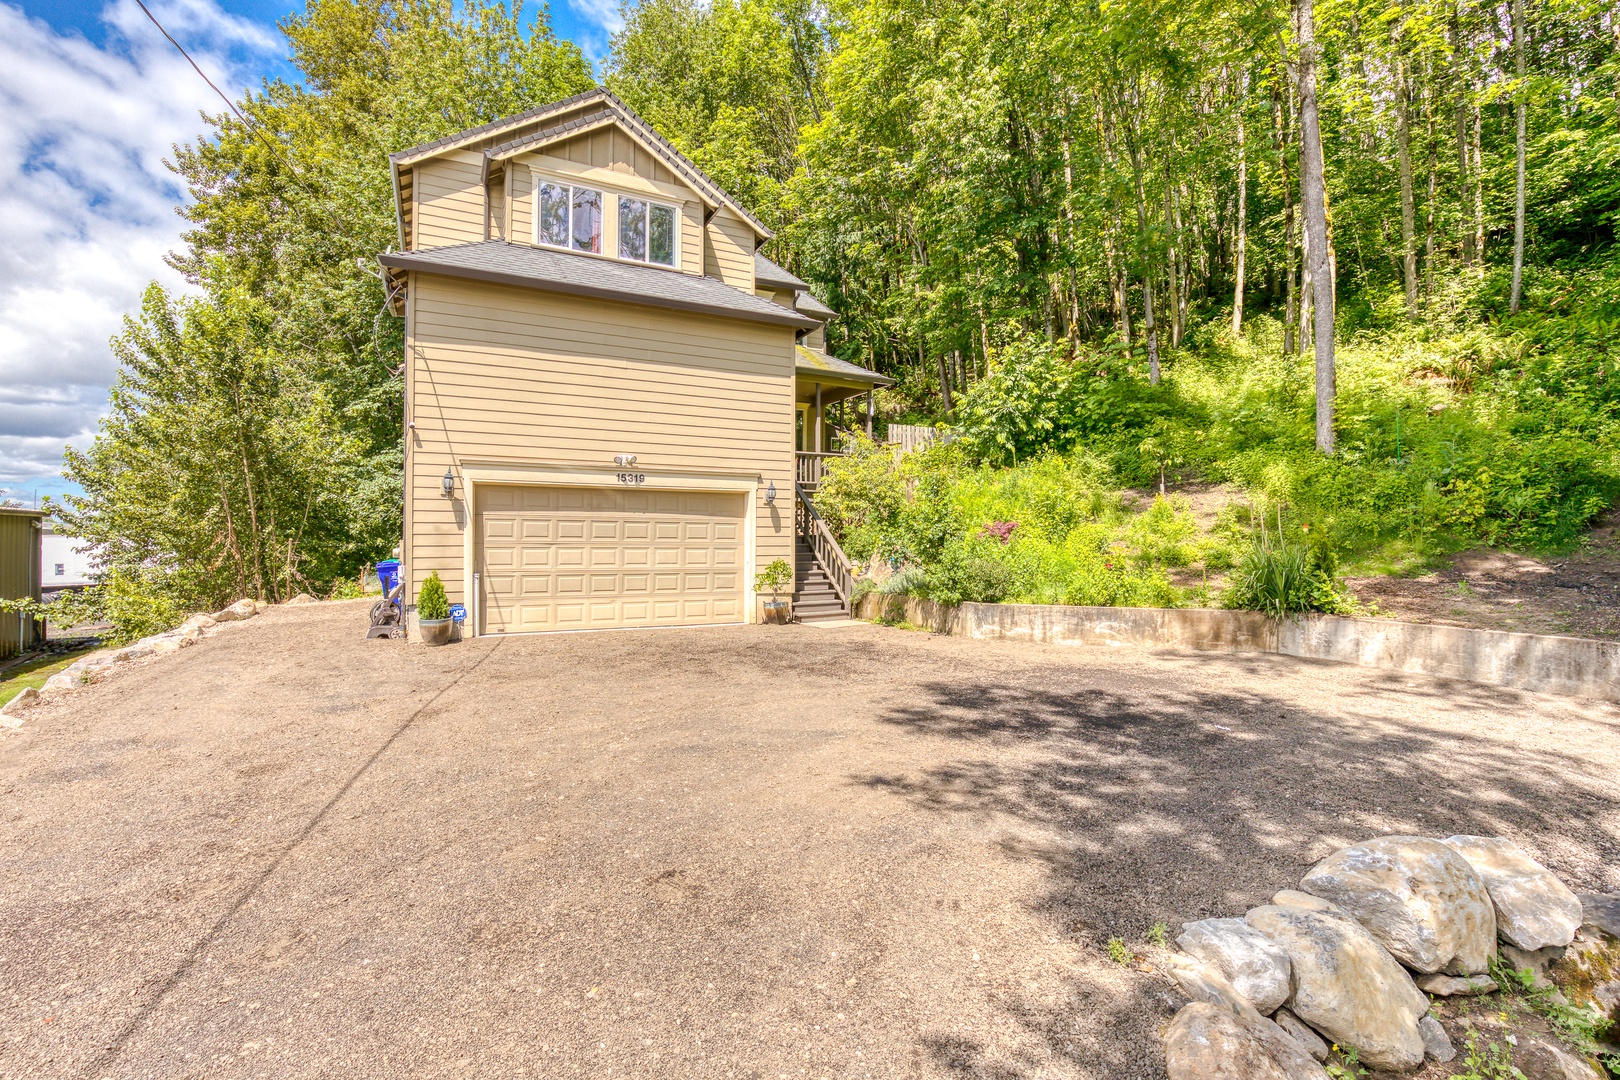 Clackamas Vacation Rentals, Duck Crossing - Easy access to the garage from the driveway